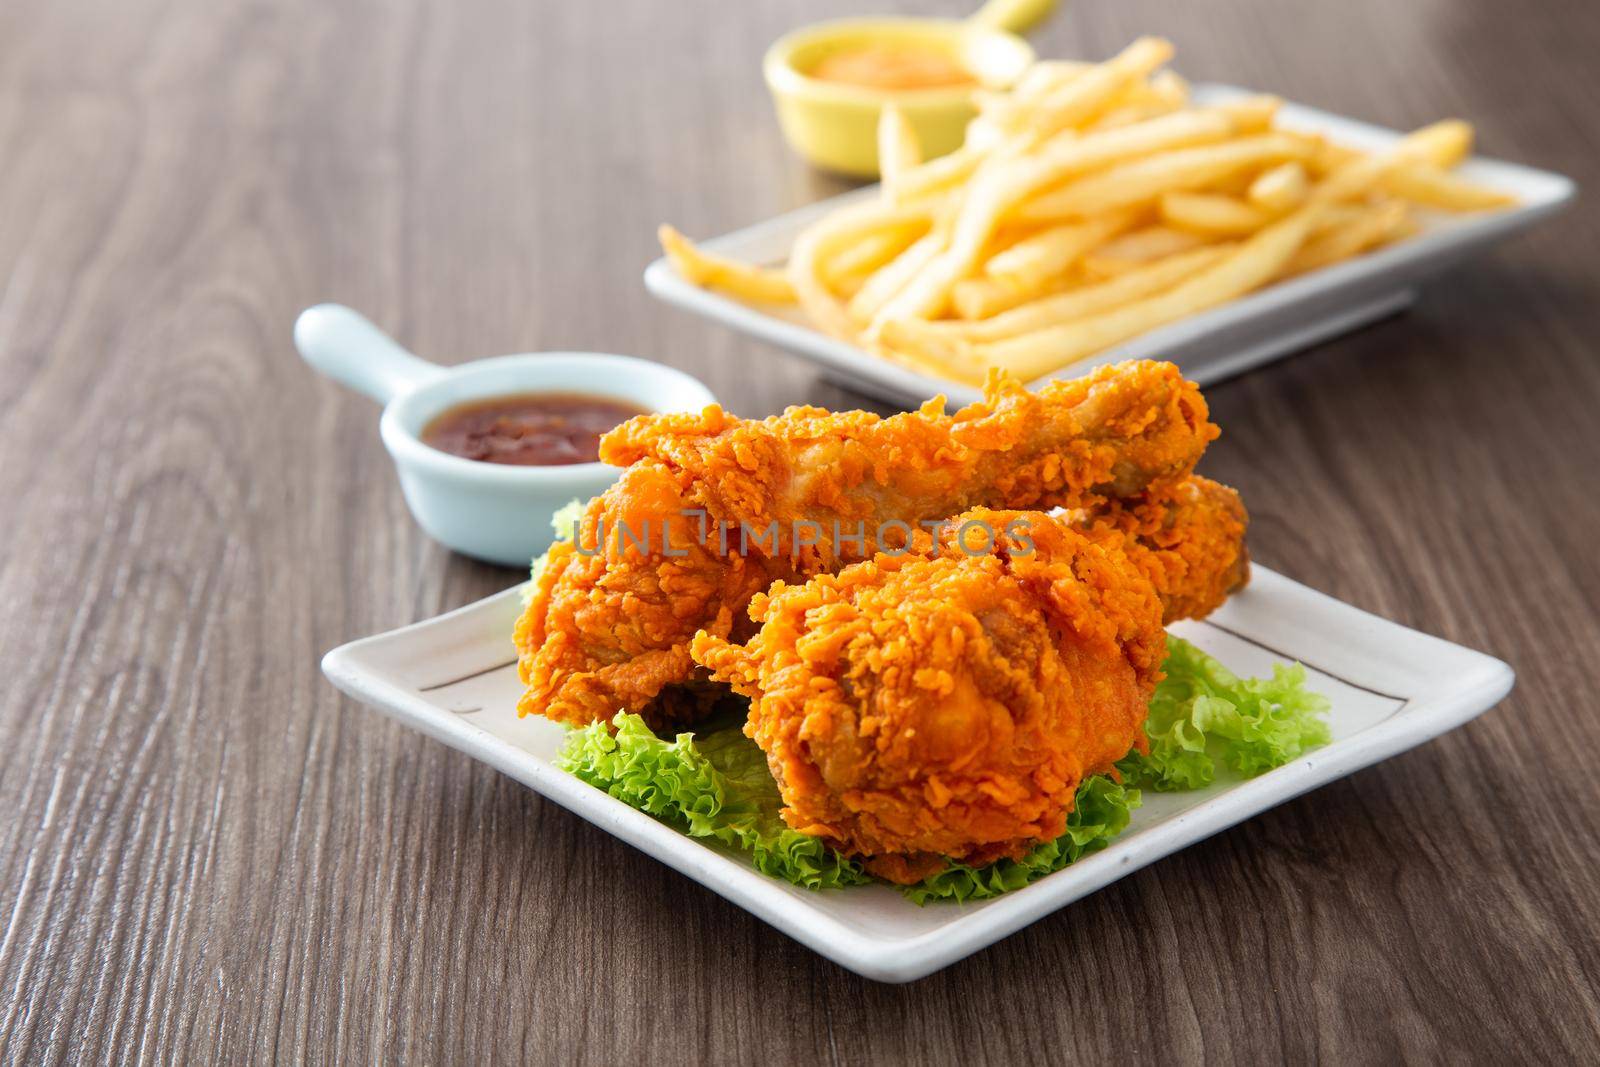 crispy and golden fried chickens by tehcheesiong